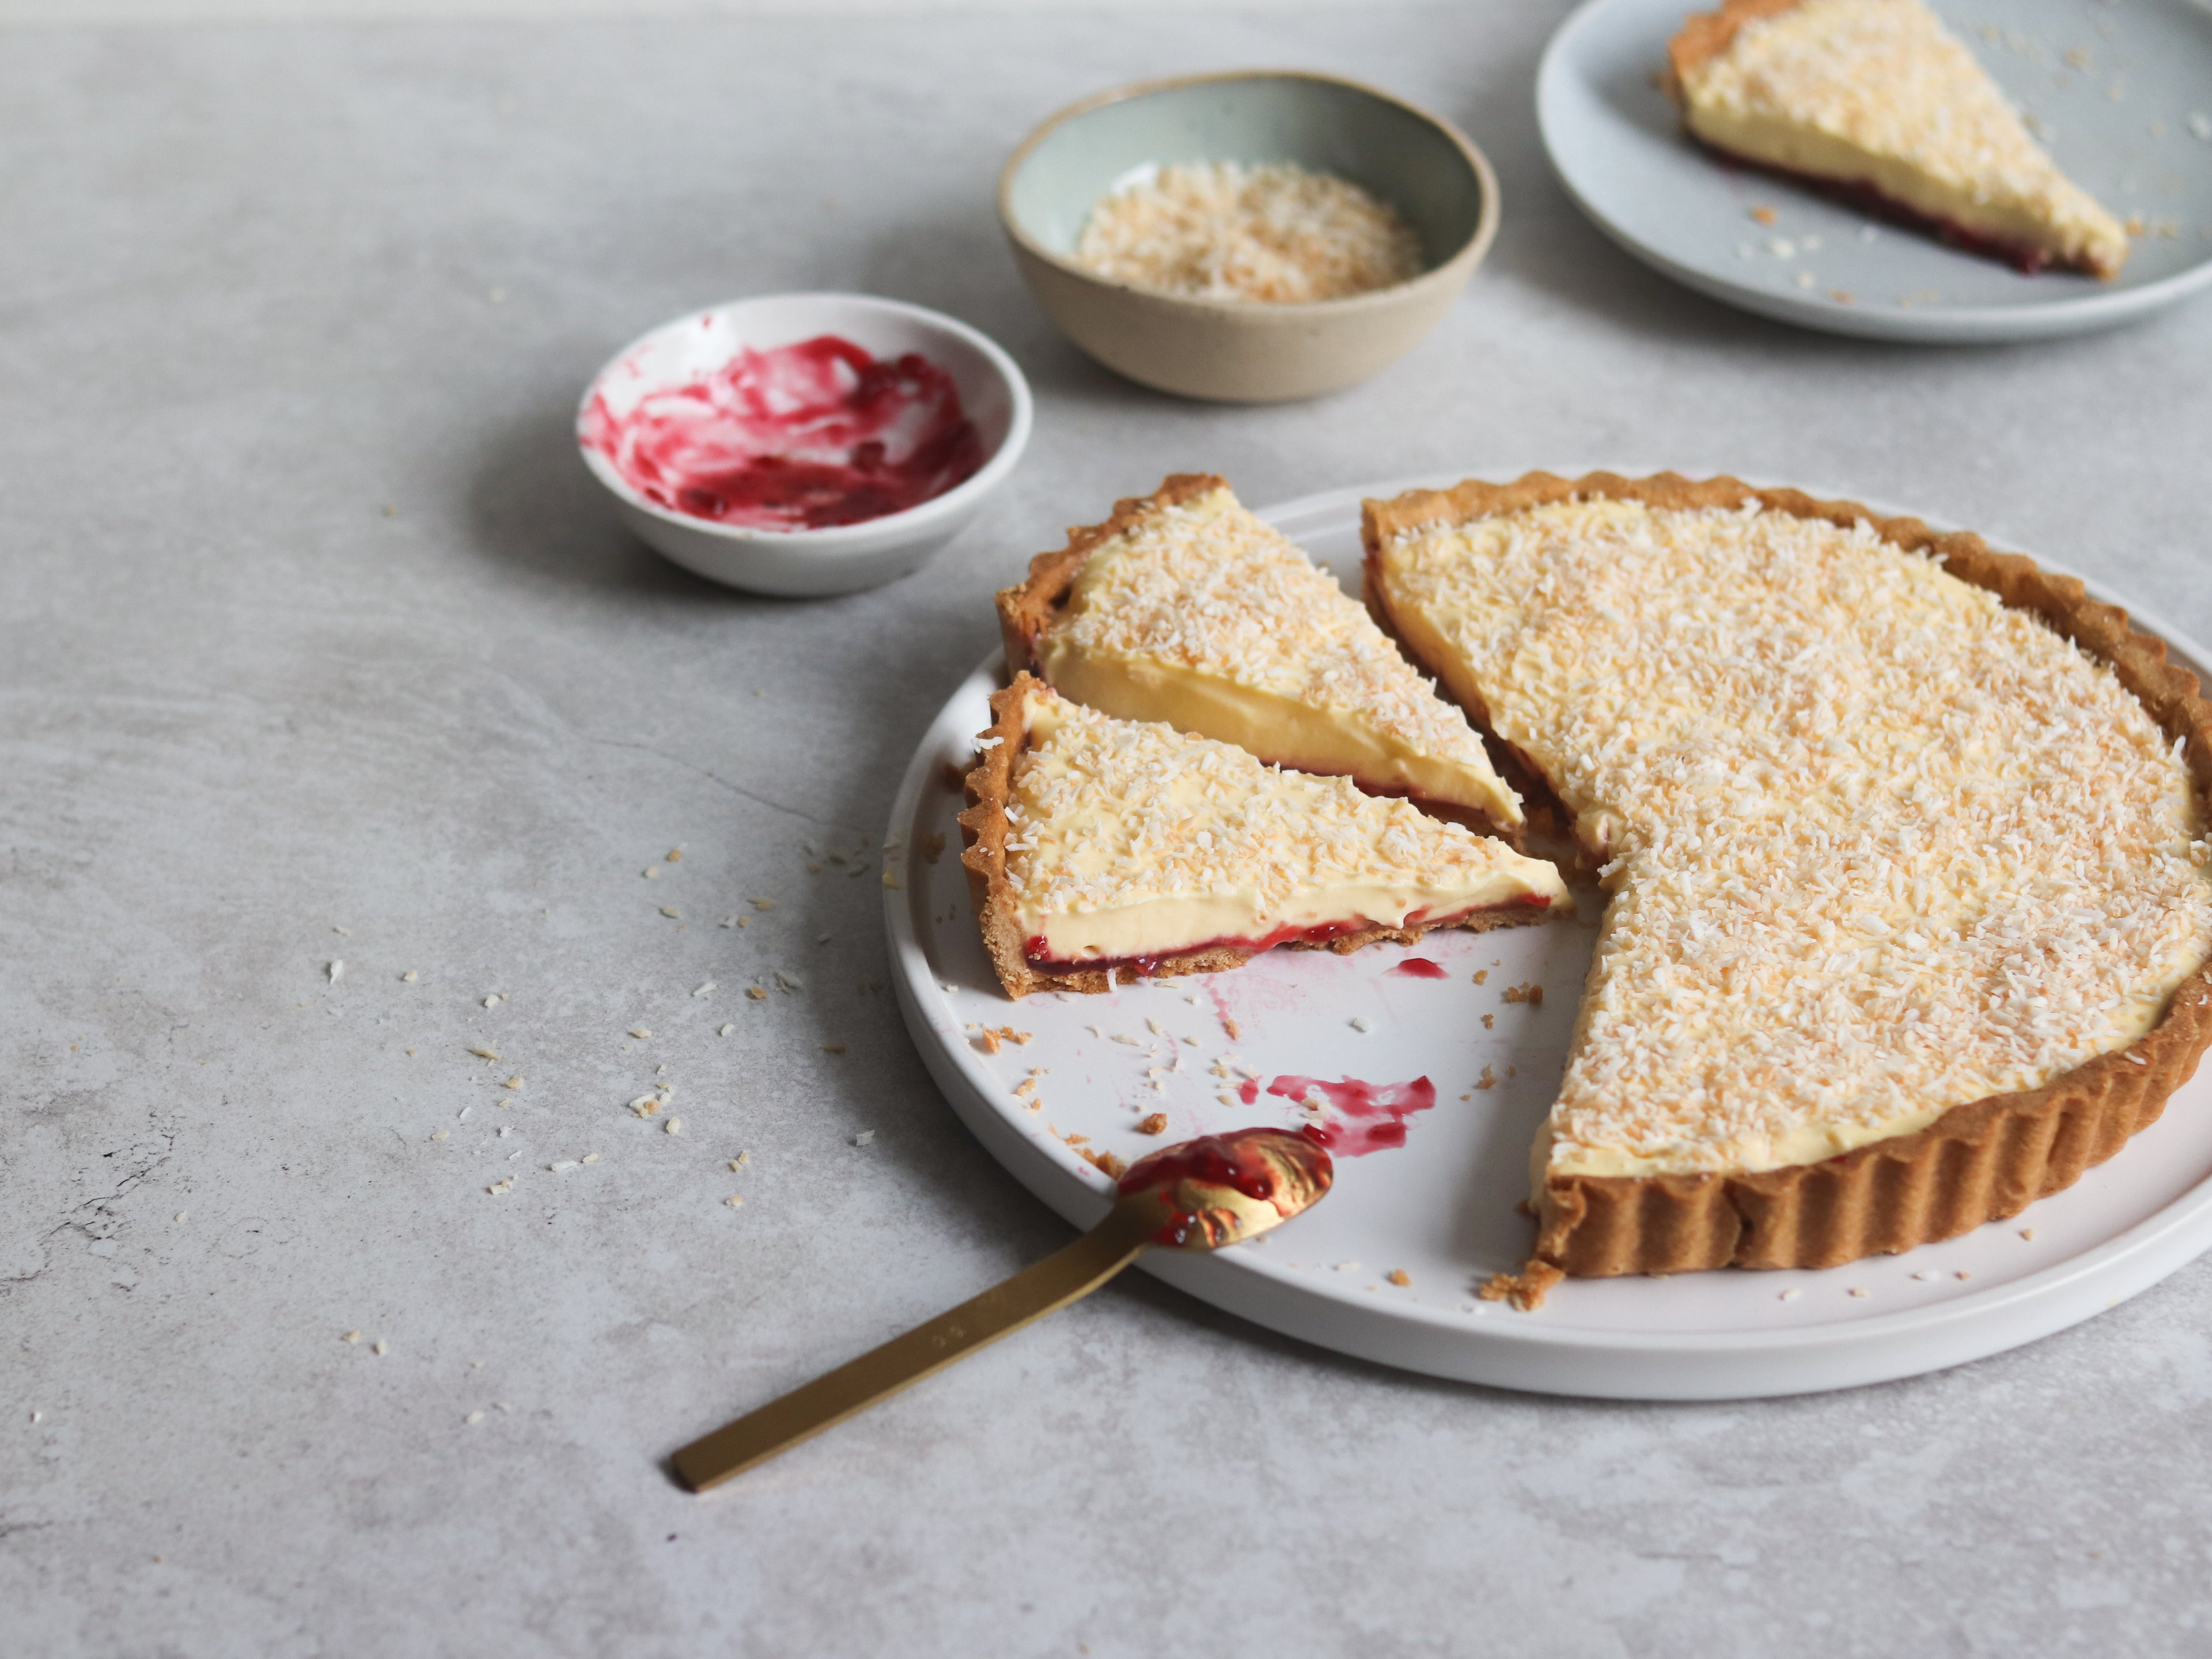 A manchester tart, with a slice cut out of it with a spoon covered in jam. Next to a bowl of jam and toasted coconut